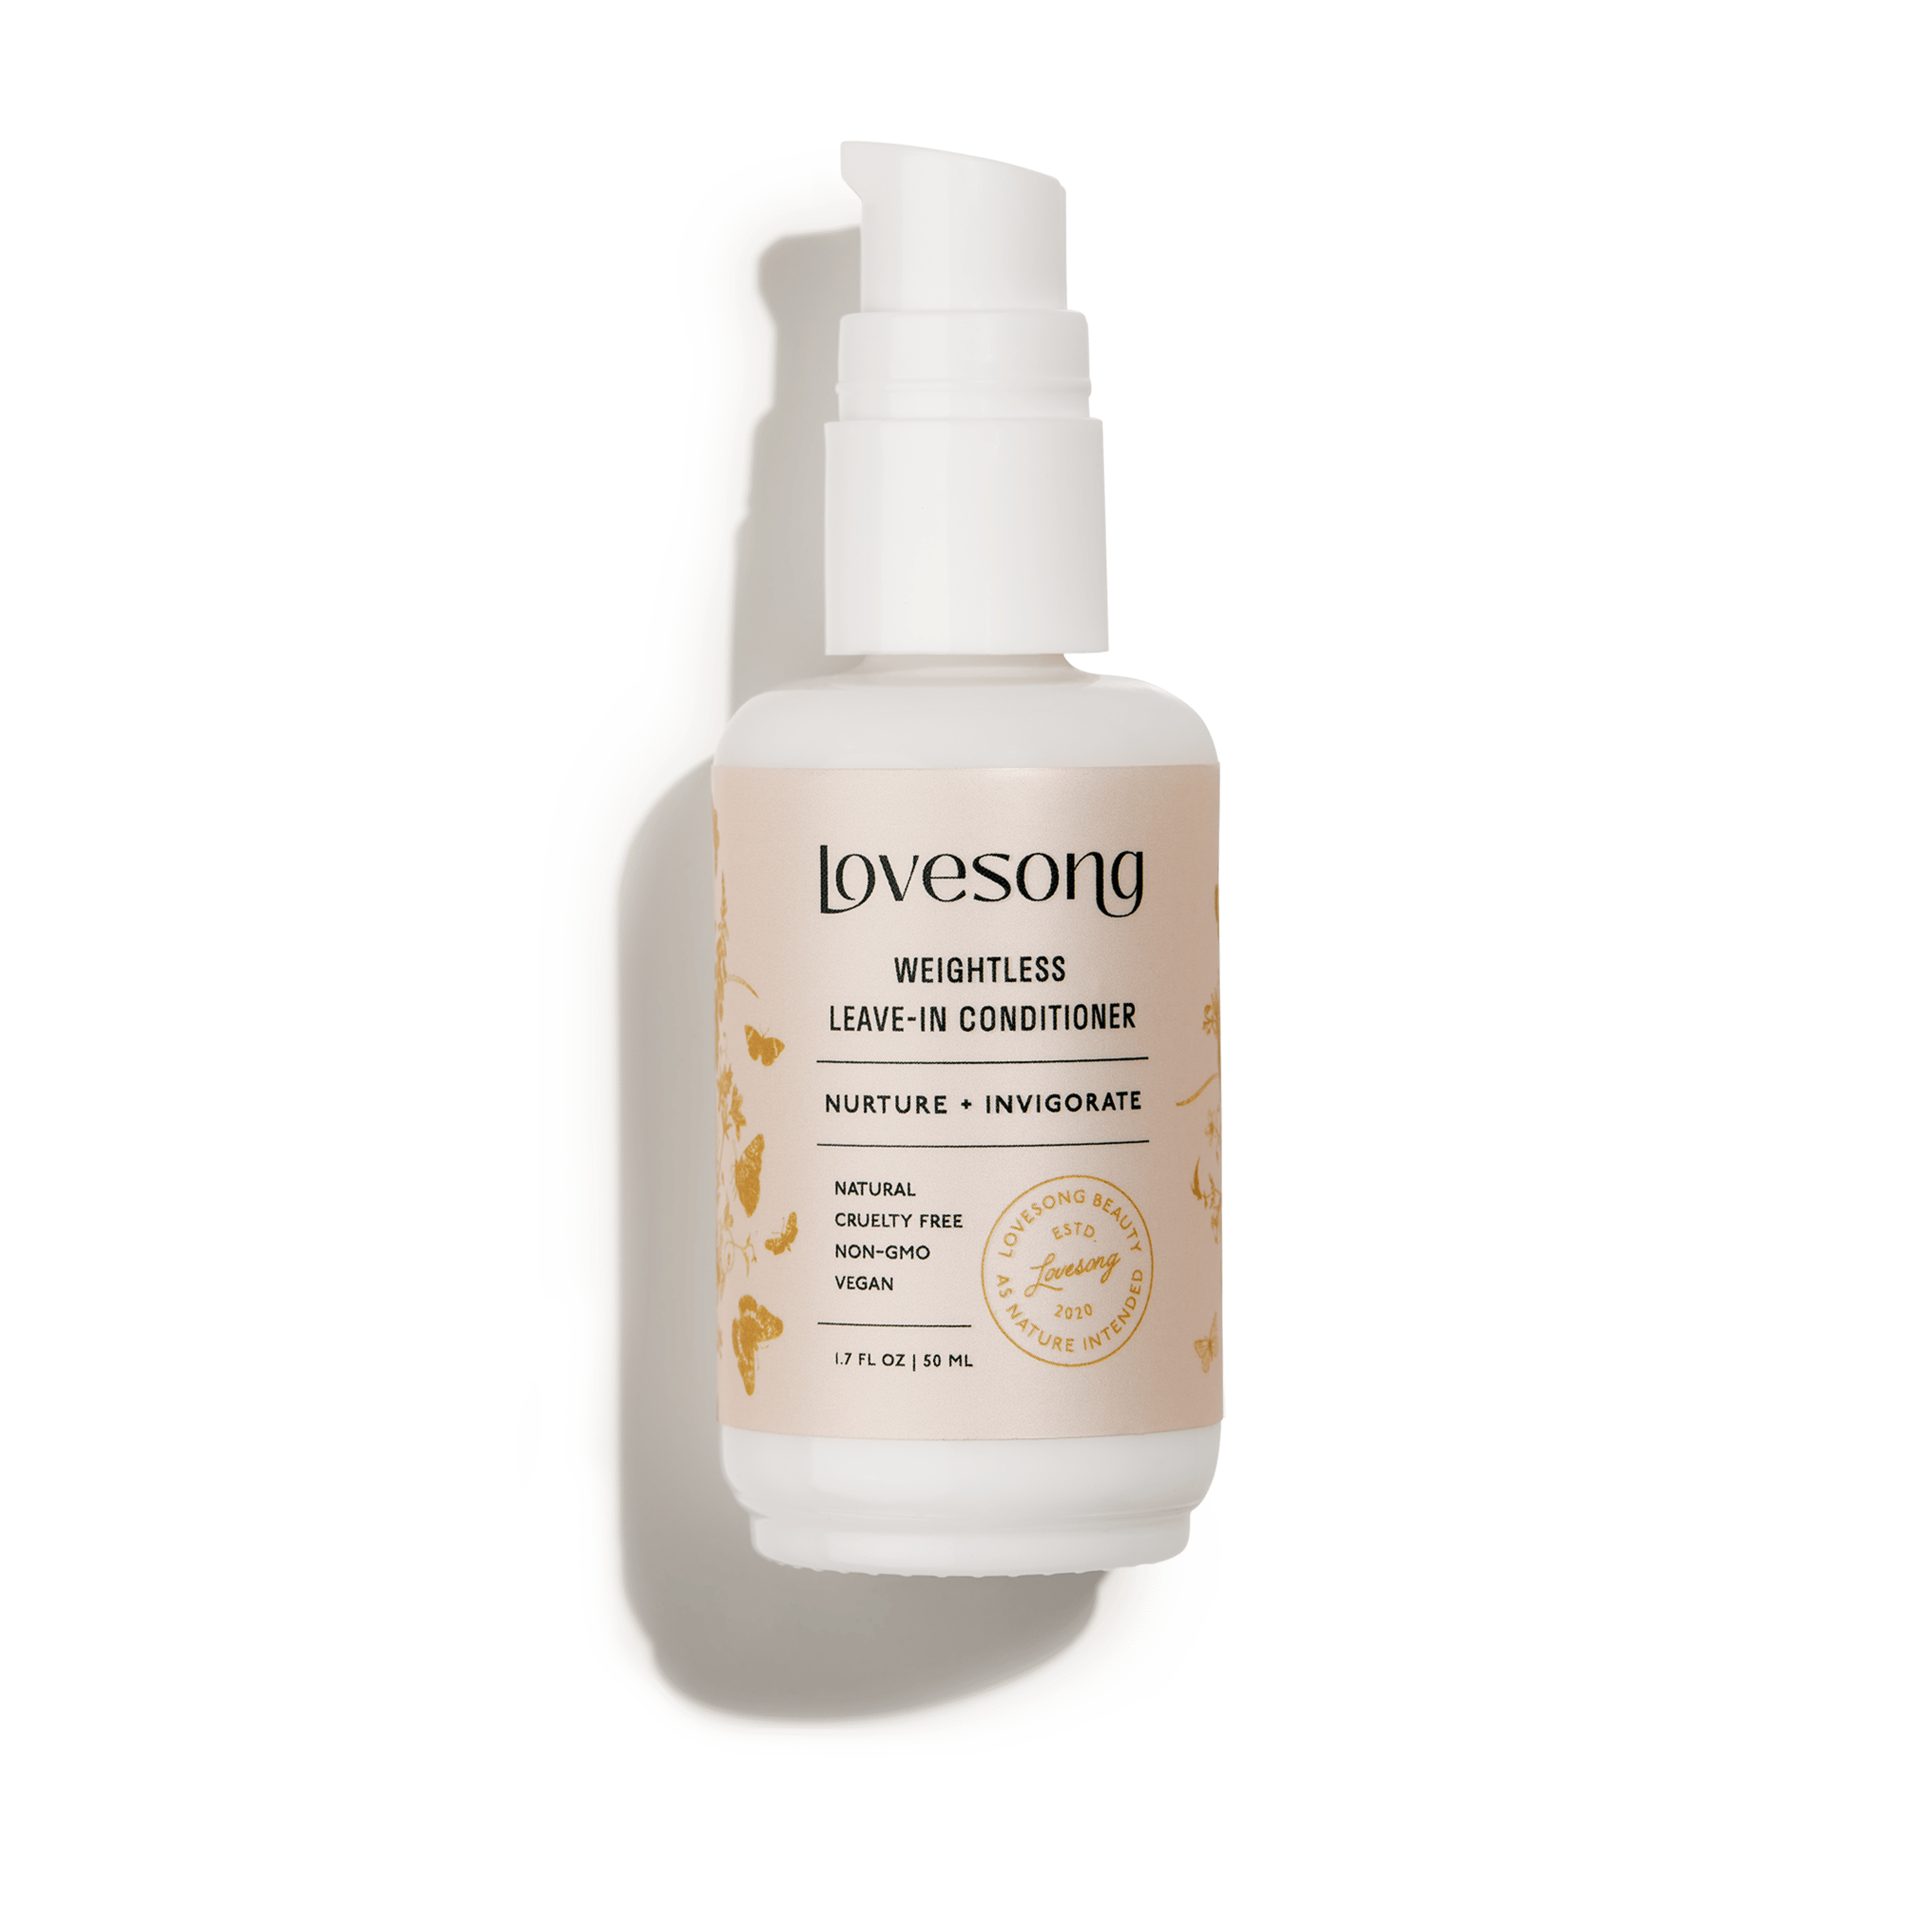 Lovesong Beauty Weightless Leave-in Conditioner